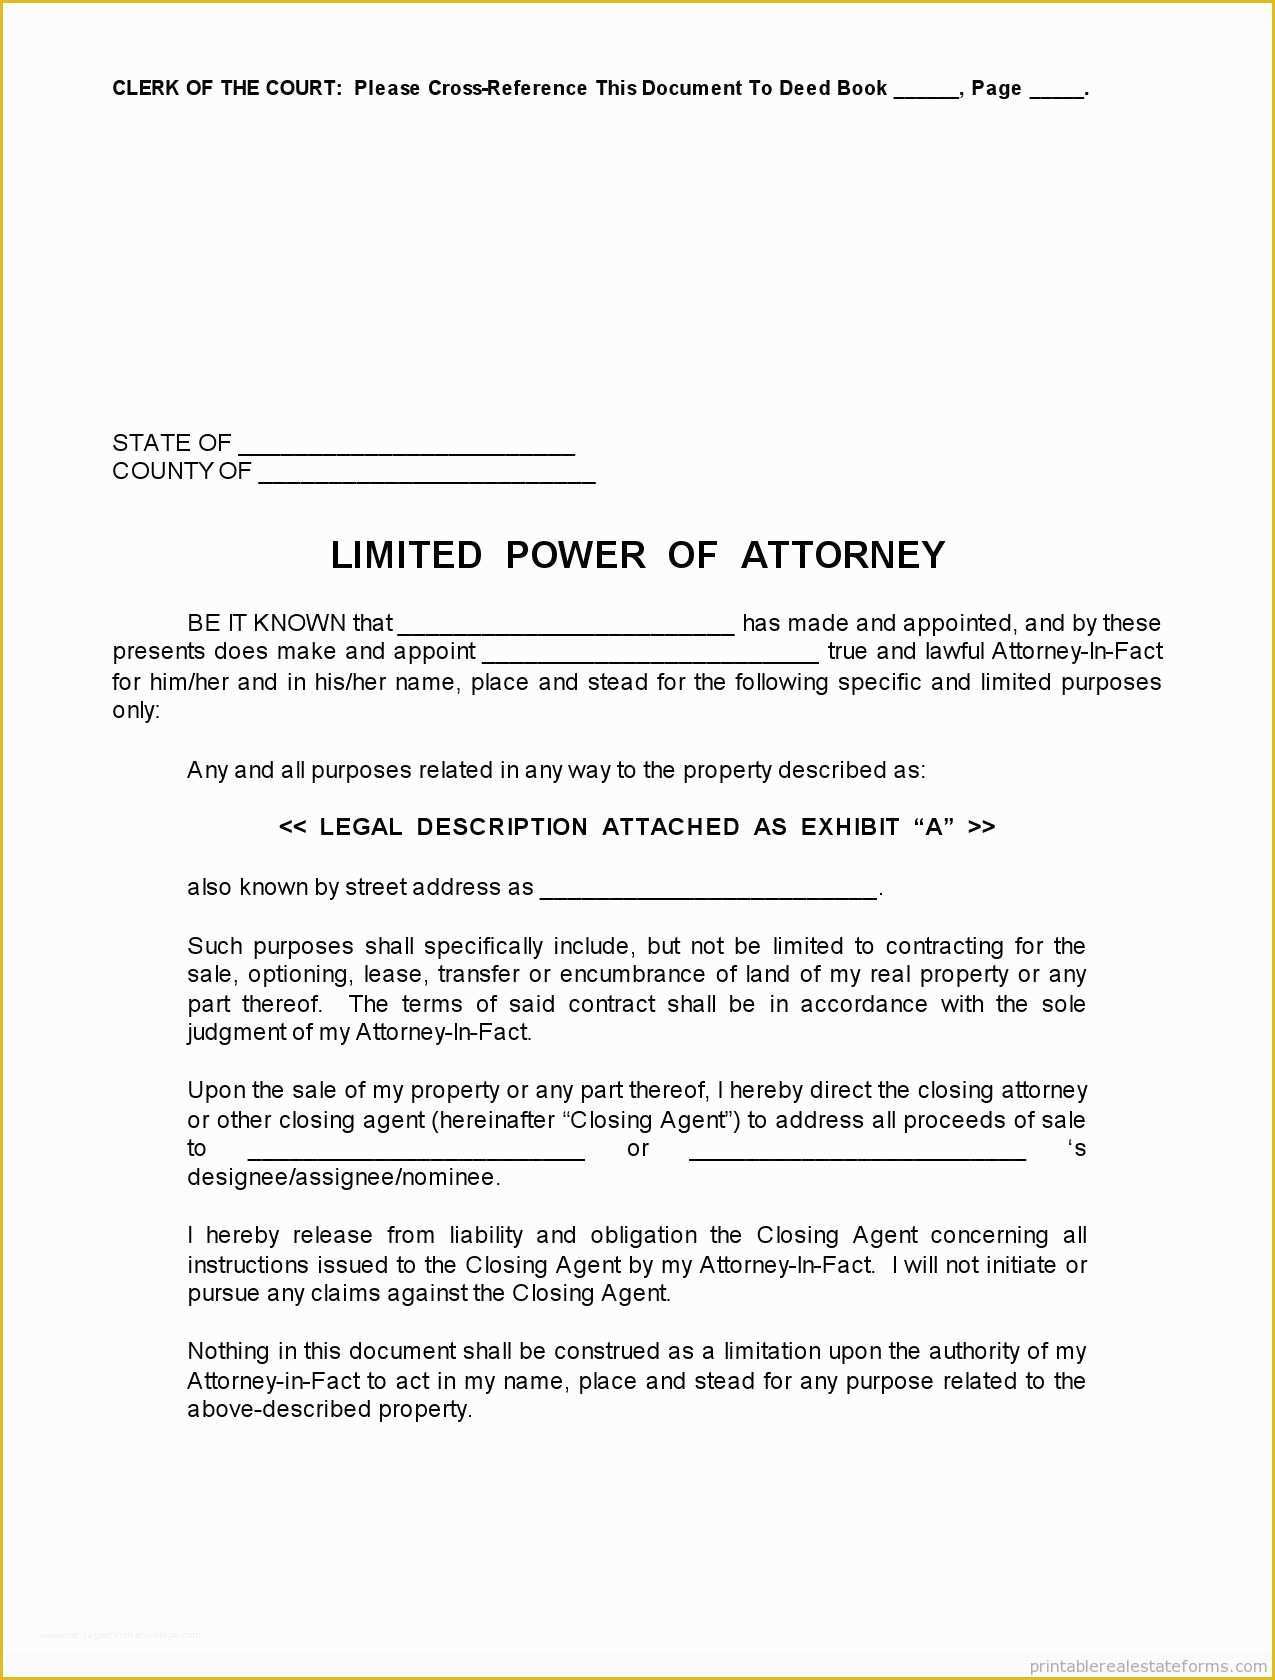 Special Power Of attorney Template Free Of Free Printable Limited Power Of attorney forms [sample]